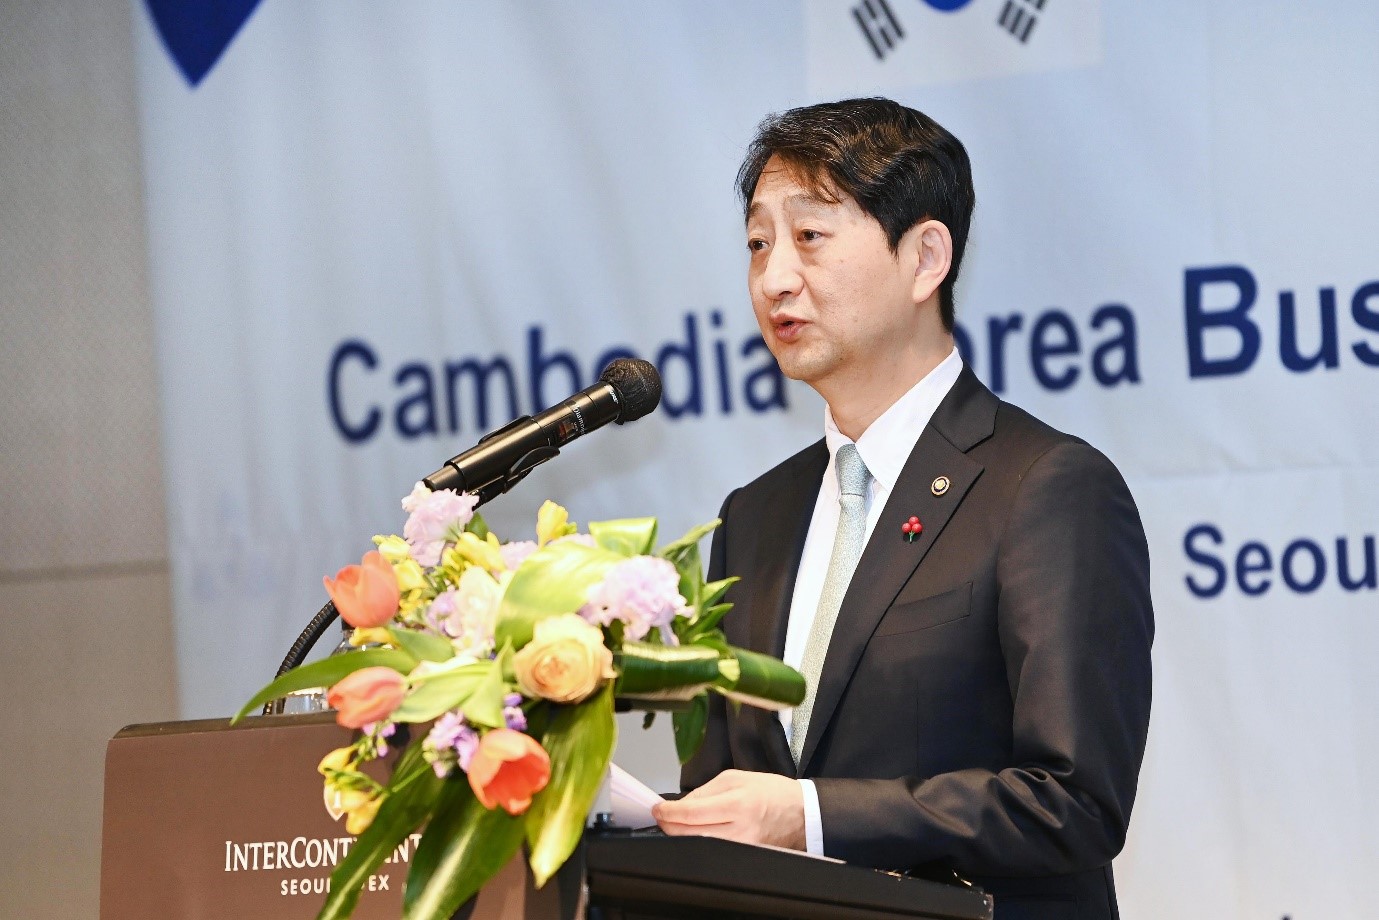 Trade Minister attends Korea-Cambodia Business & Investment Forum